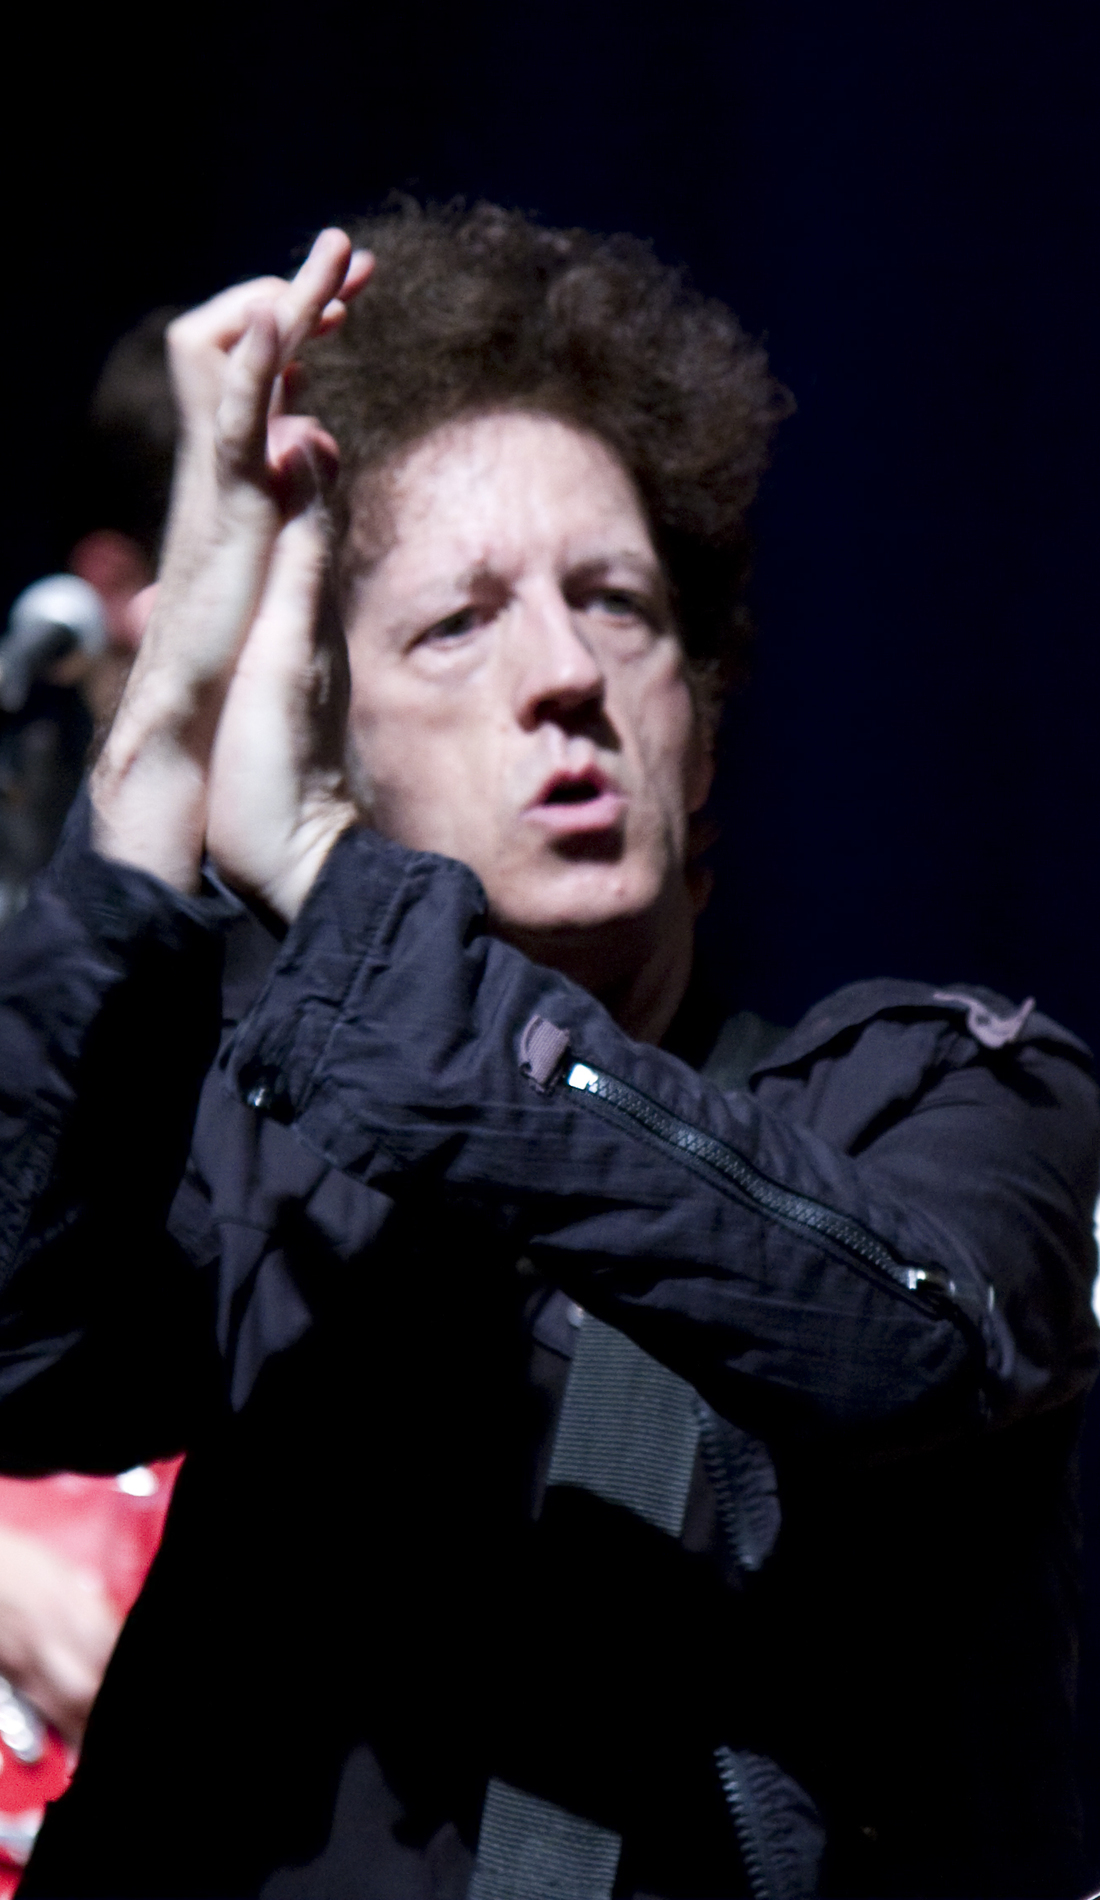 A Willie Nile live event